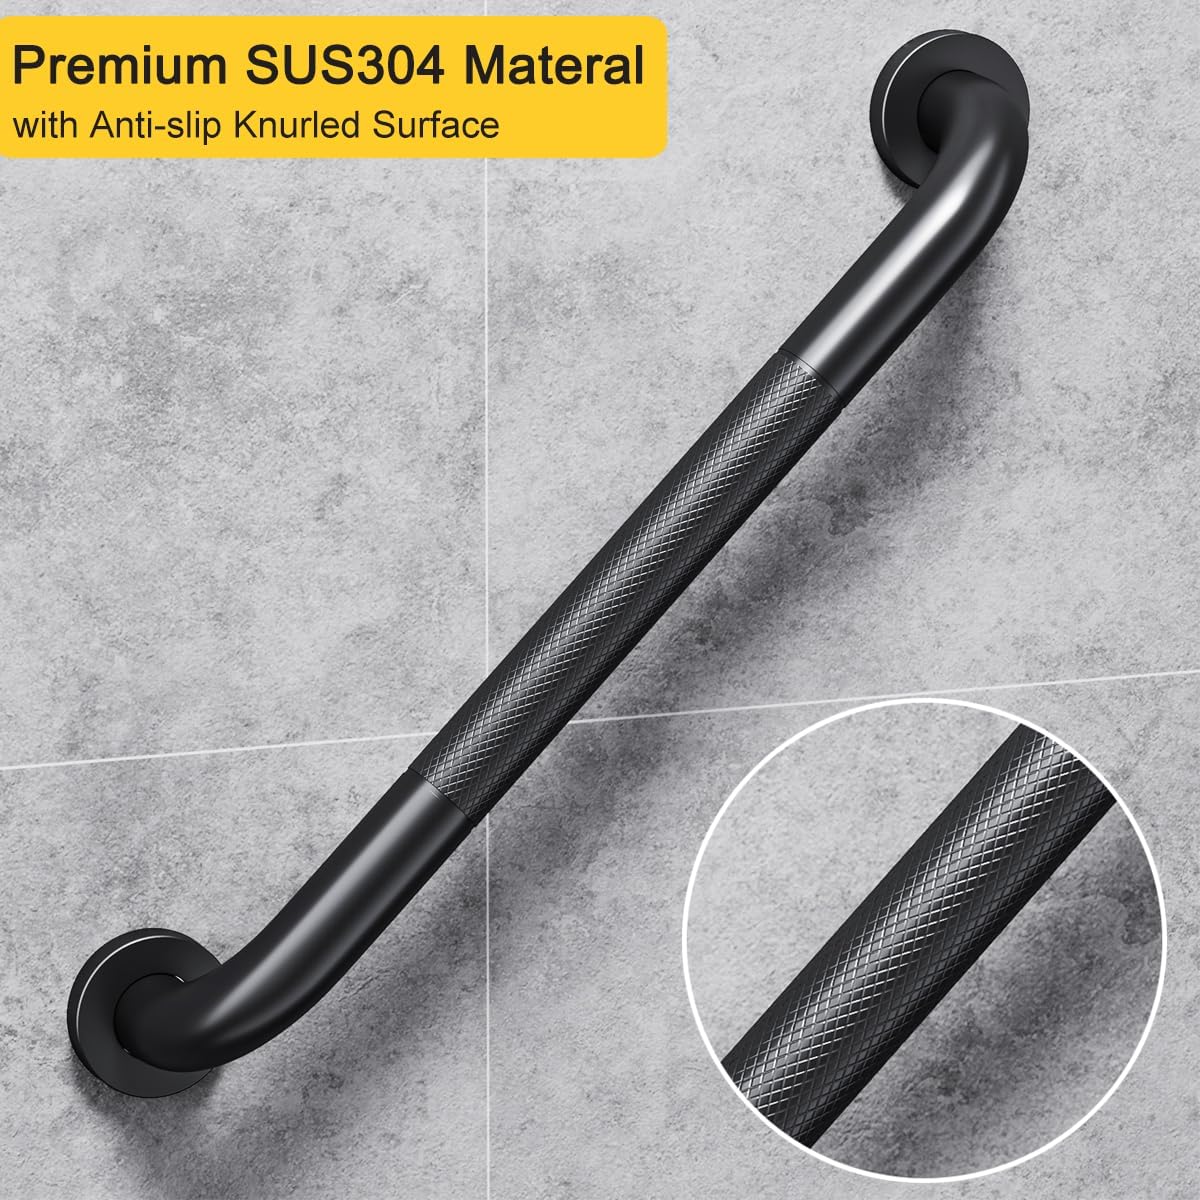 FANHAO 2 Pack Shower Grab Bar, 16 Inch Stainless Steel Bathroom Grab Bar with Anti-Slip Knurled Grip